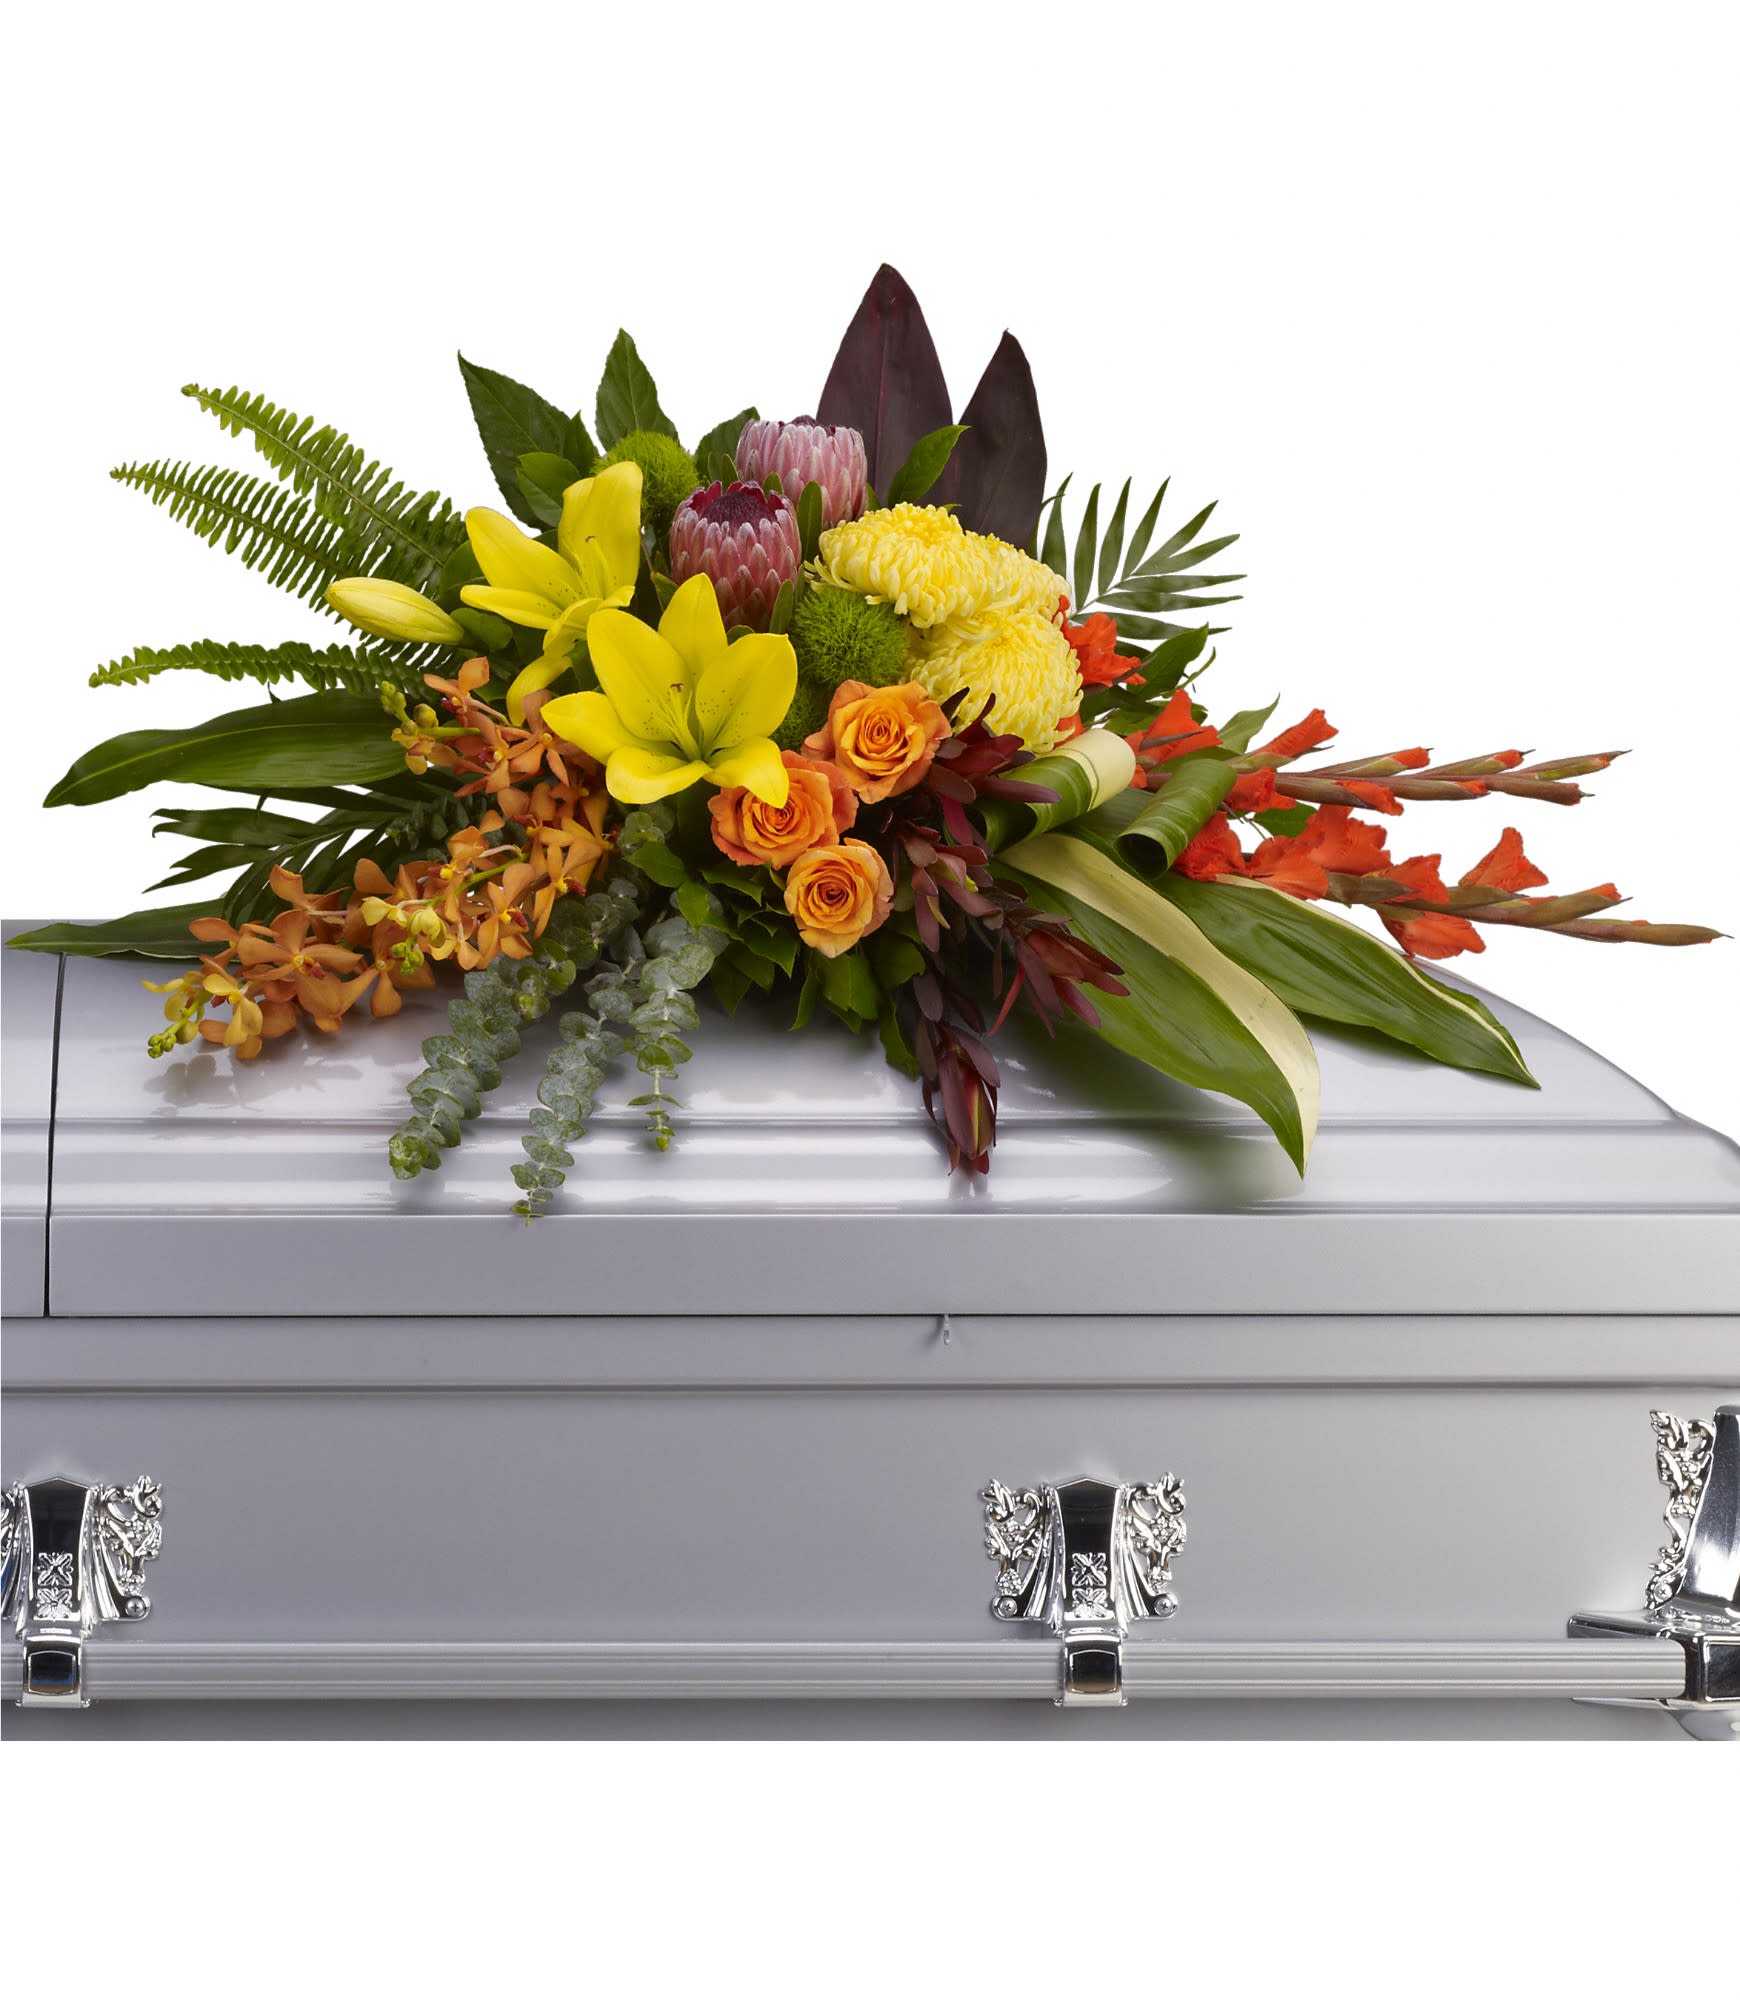 Island Memories Casket Spray - Graceful and fresh, this tropical-influenced spray sheds light on memories that will be forever treasured. Splashed with color and grounded with earth tones, it lends comfort and hope to any memorial. T244-3A 